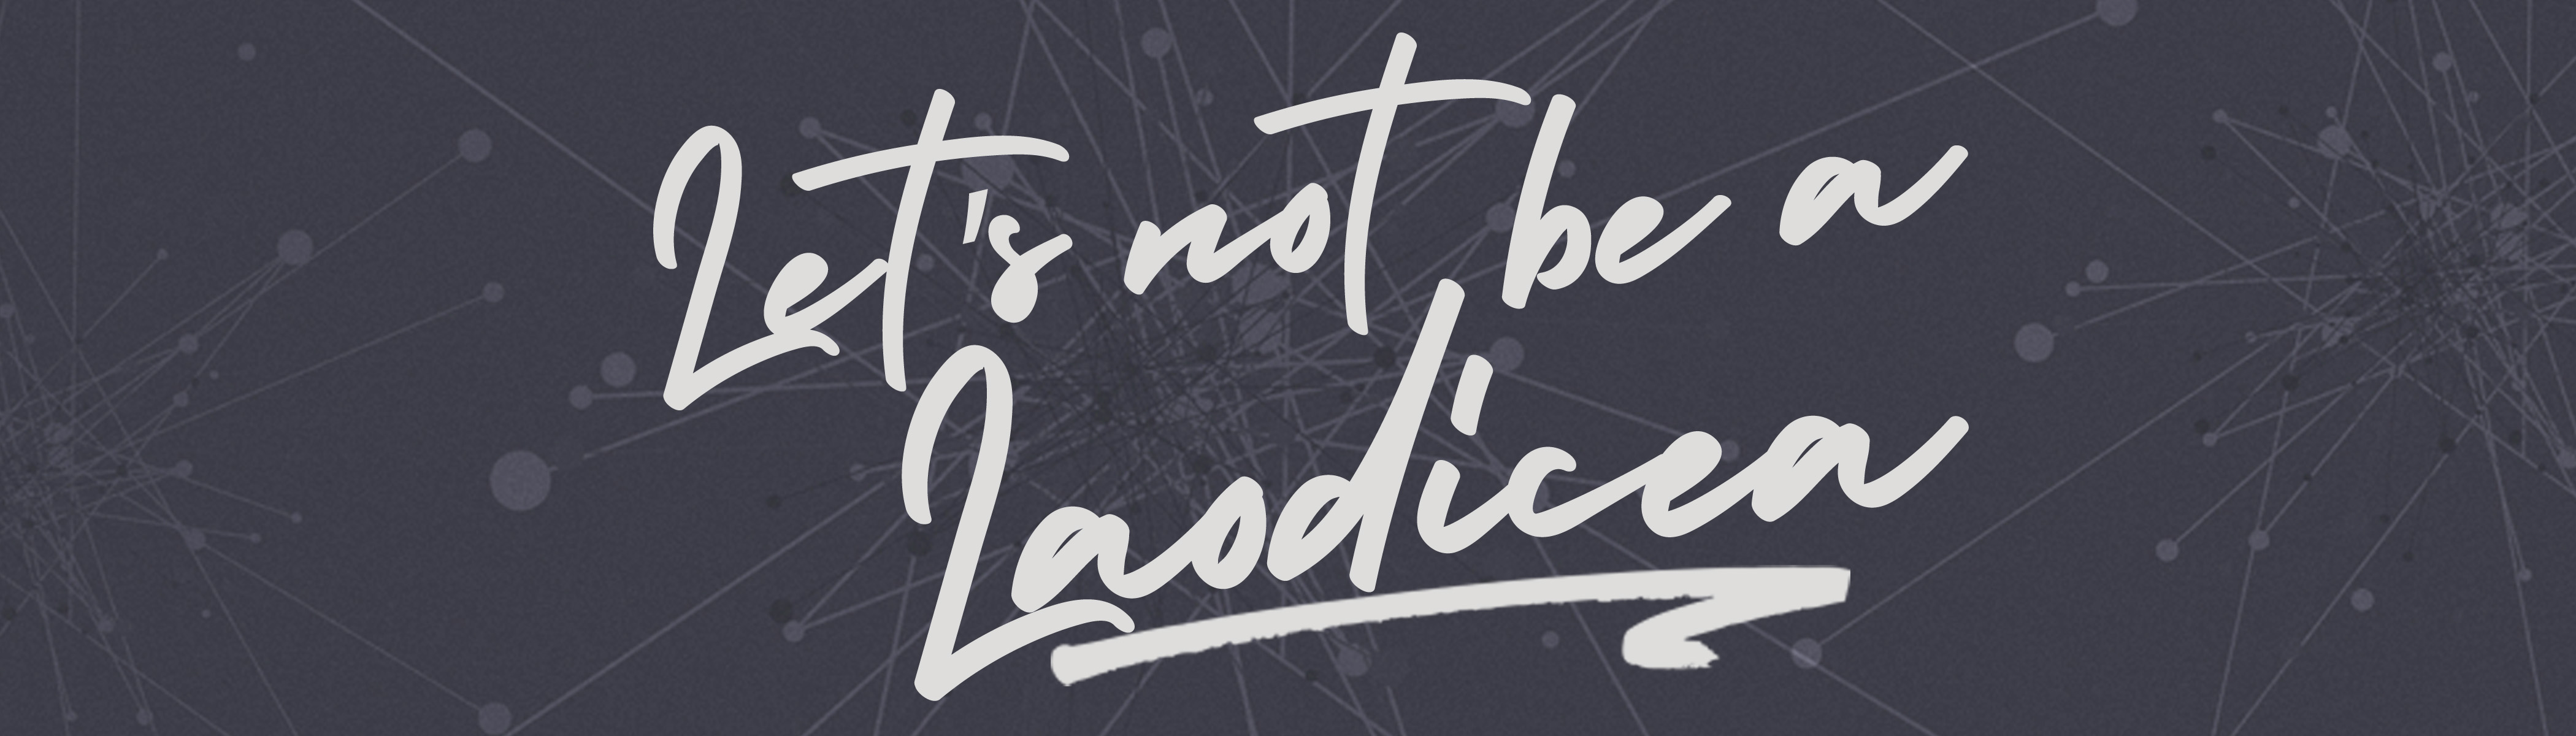 Let’s not be a Laodicea